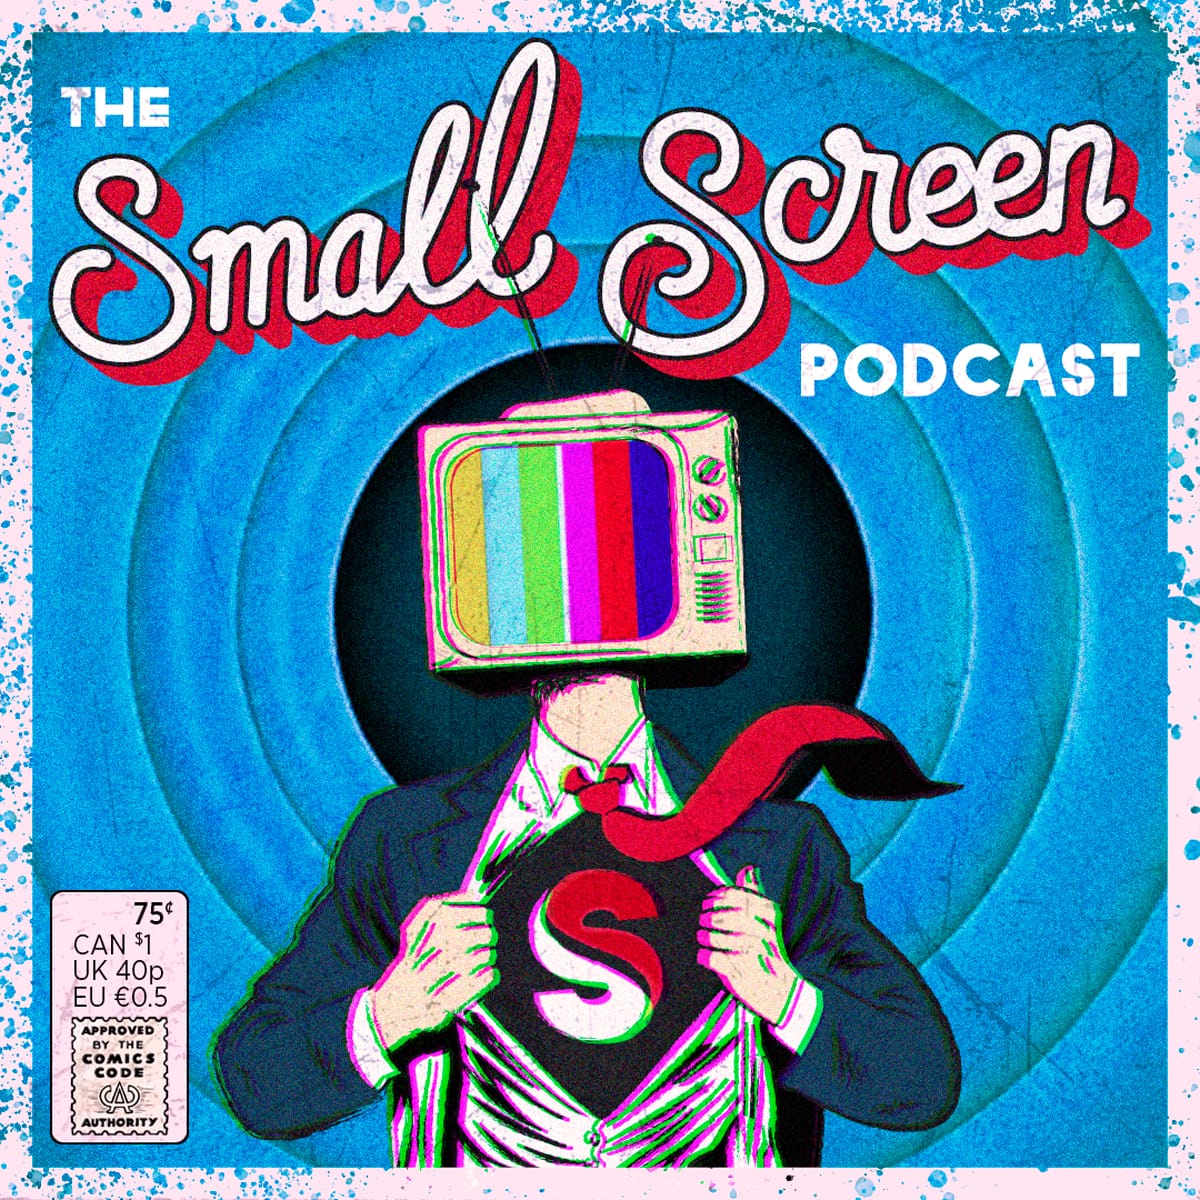 The Small Screen Podcast Artwork